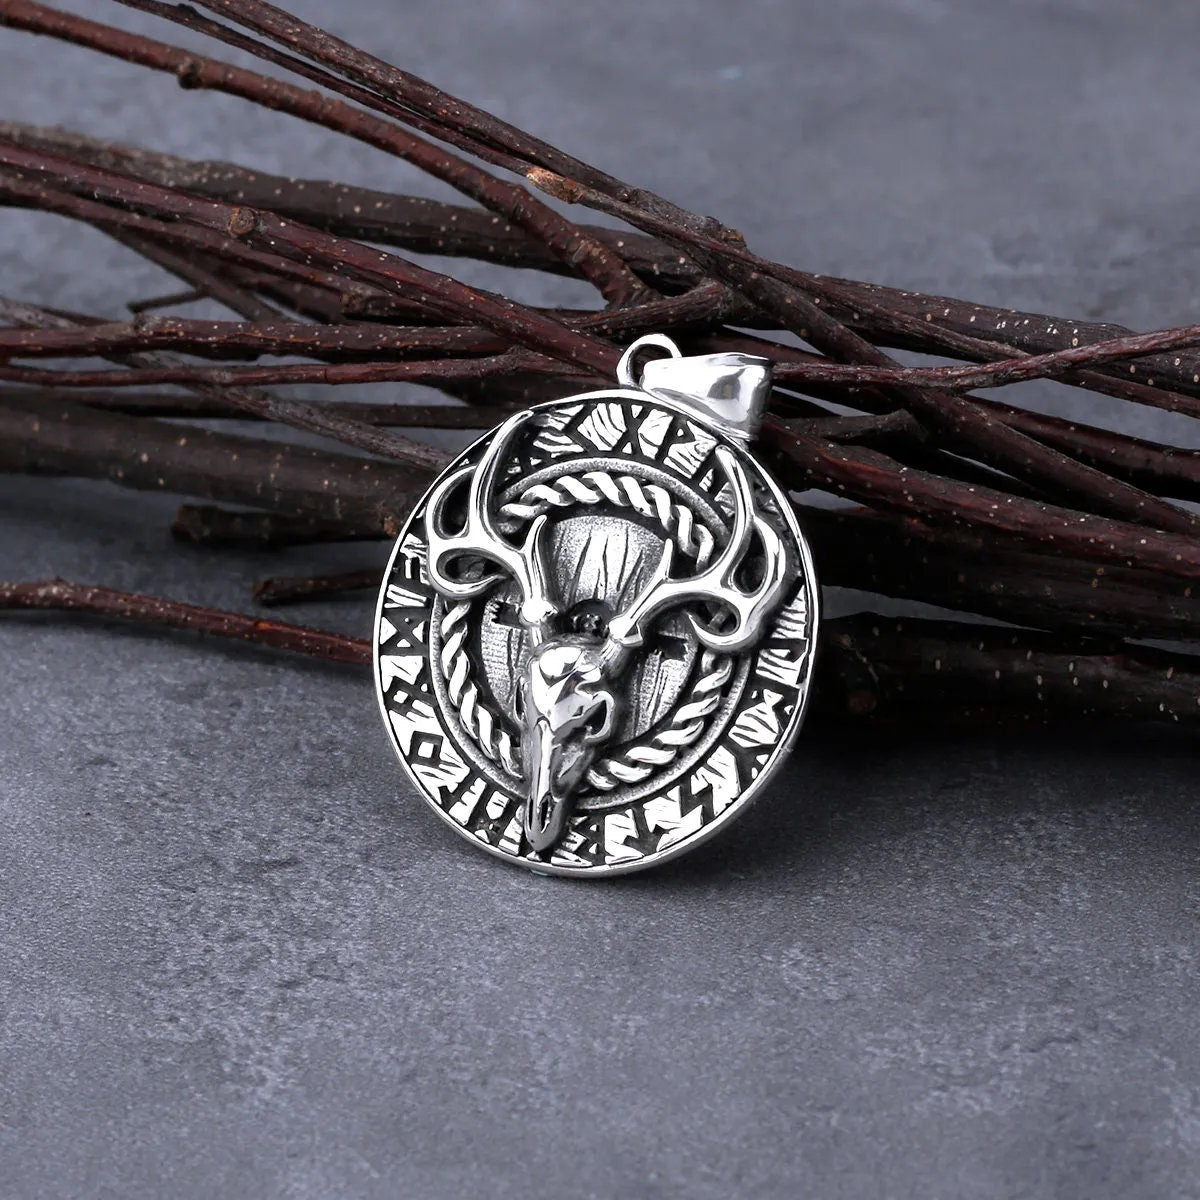 Stag Stainless Steel Disc Pendant, Necklace, Lifestyle Jewelry, Stag/Vixen Lifestyle - New 2023